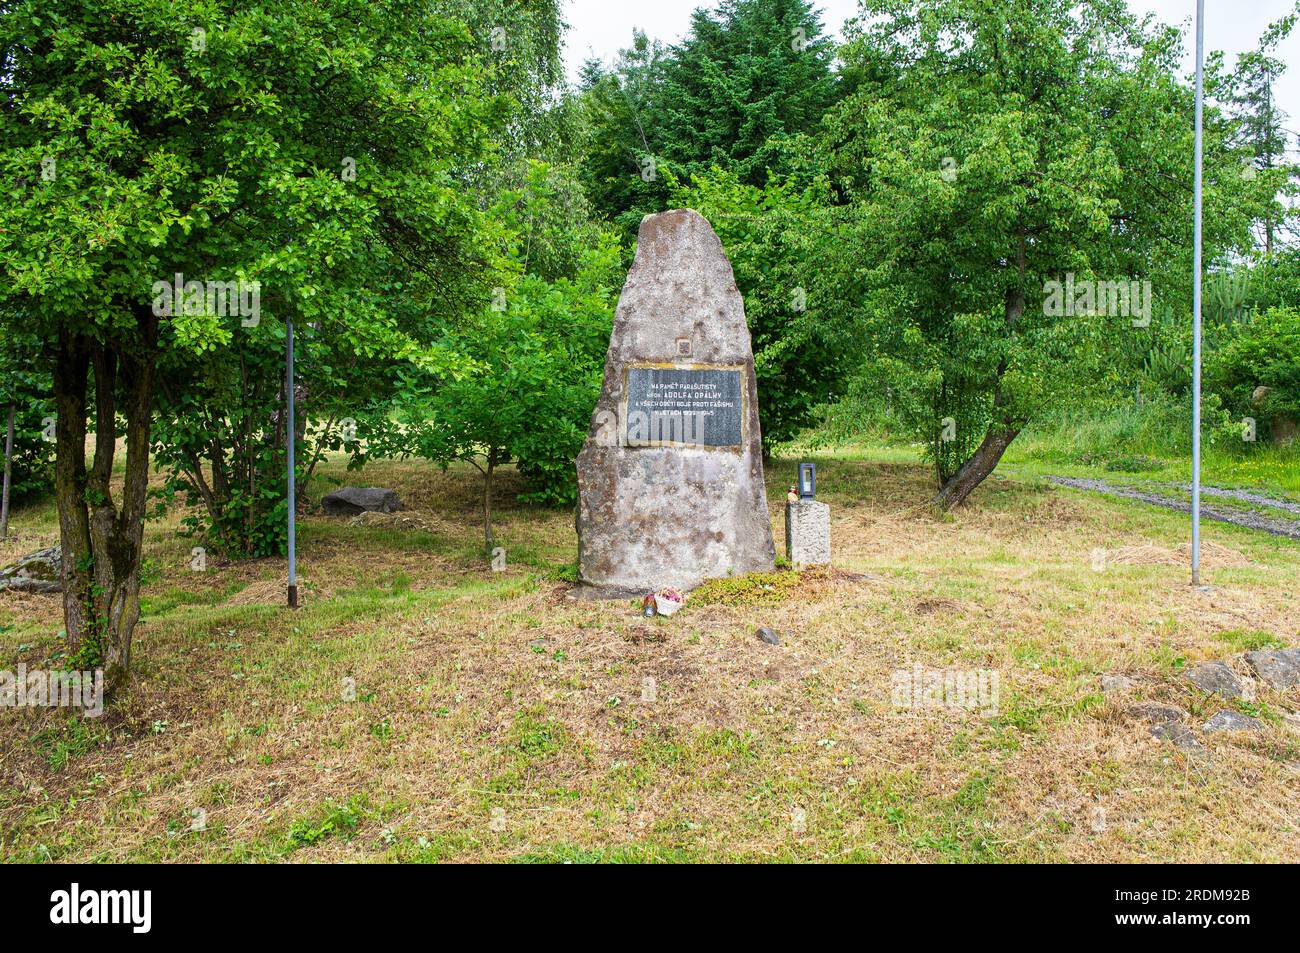 The monument of Adolf Opalka and the parachute landing of the Out Distance group in 1942, in Orechov, Jihlava region, on June 24, 2021. (CTK Photo/Lib Stock Photo